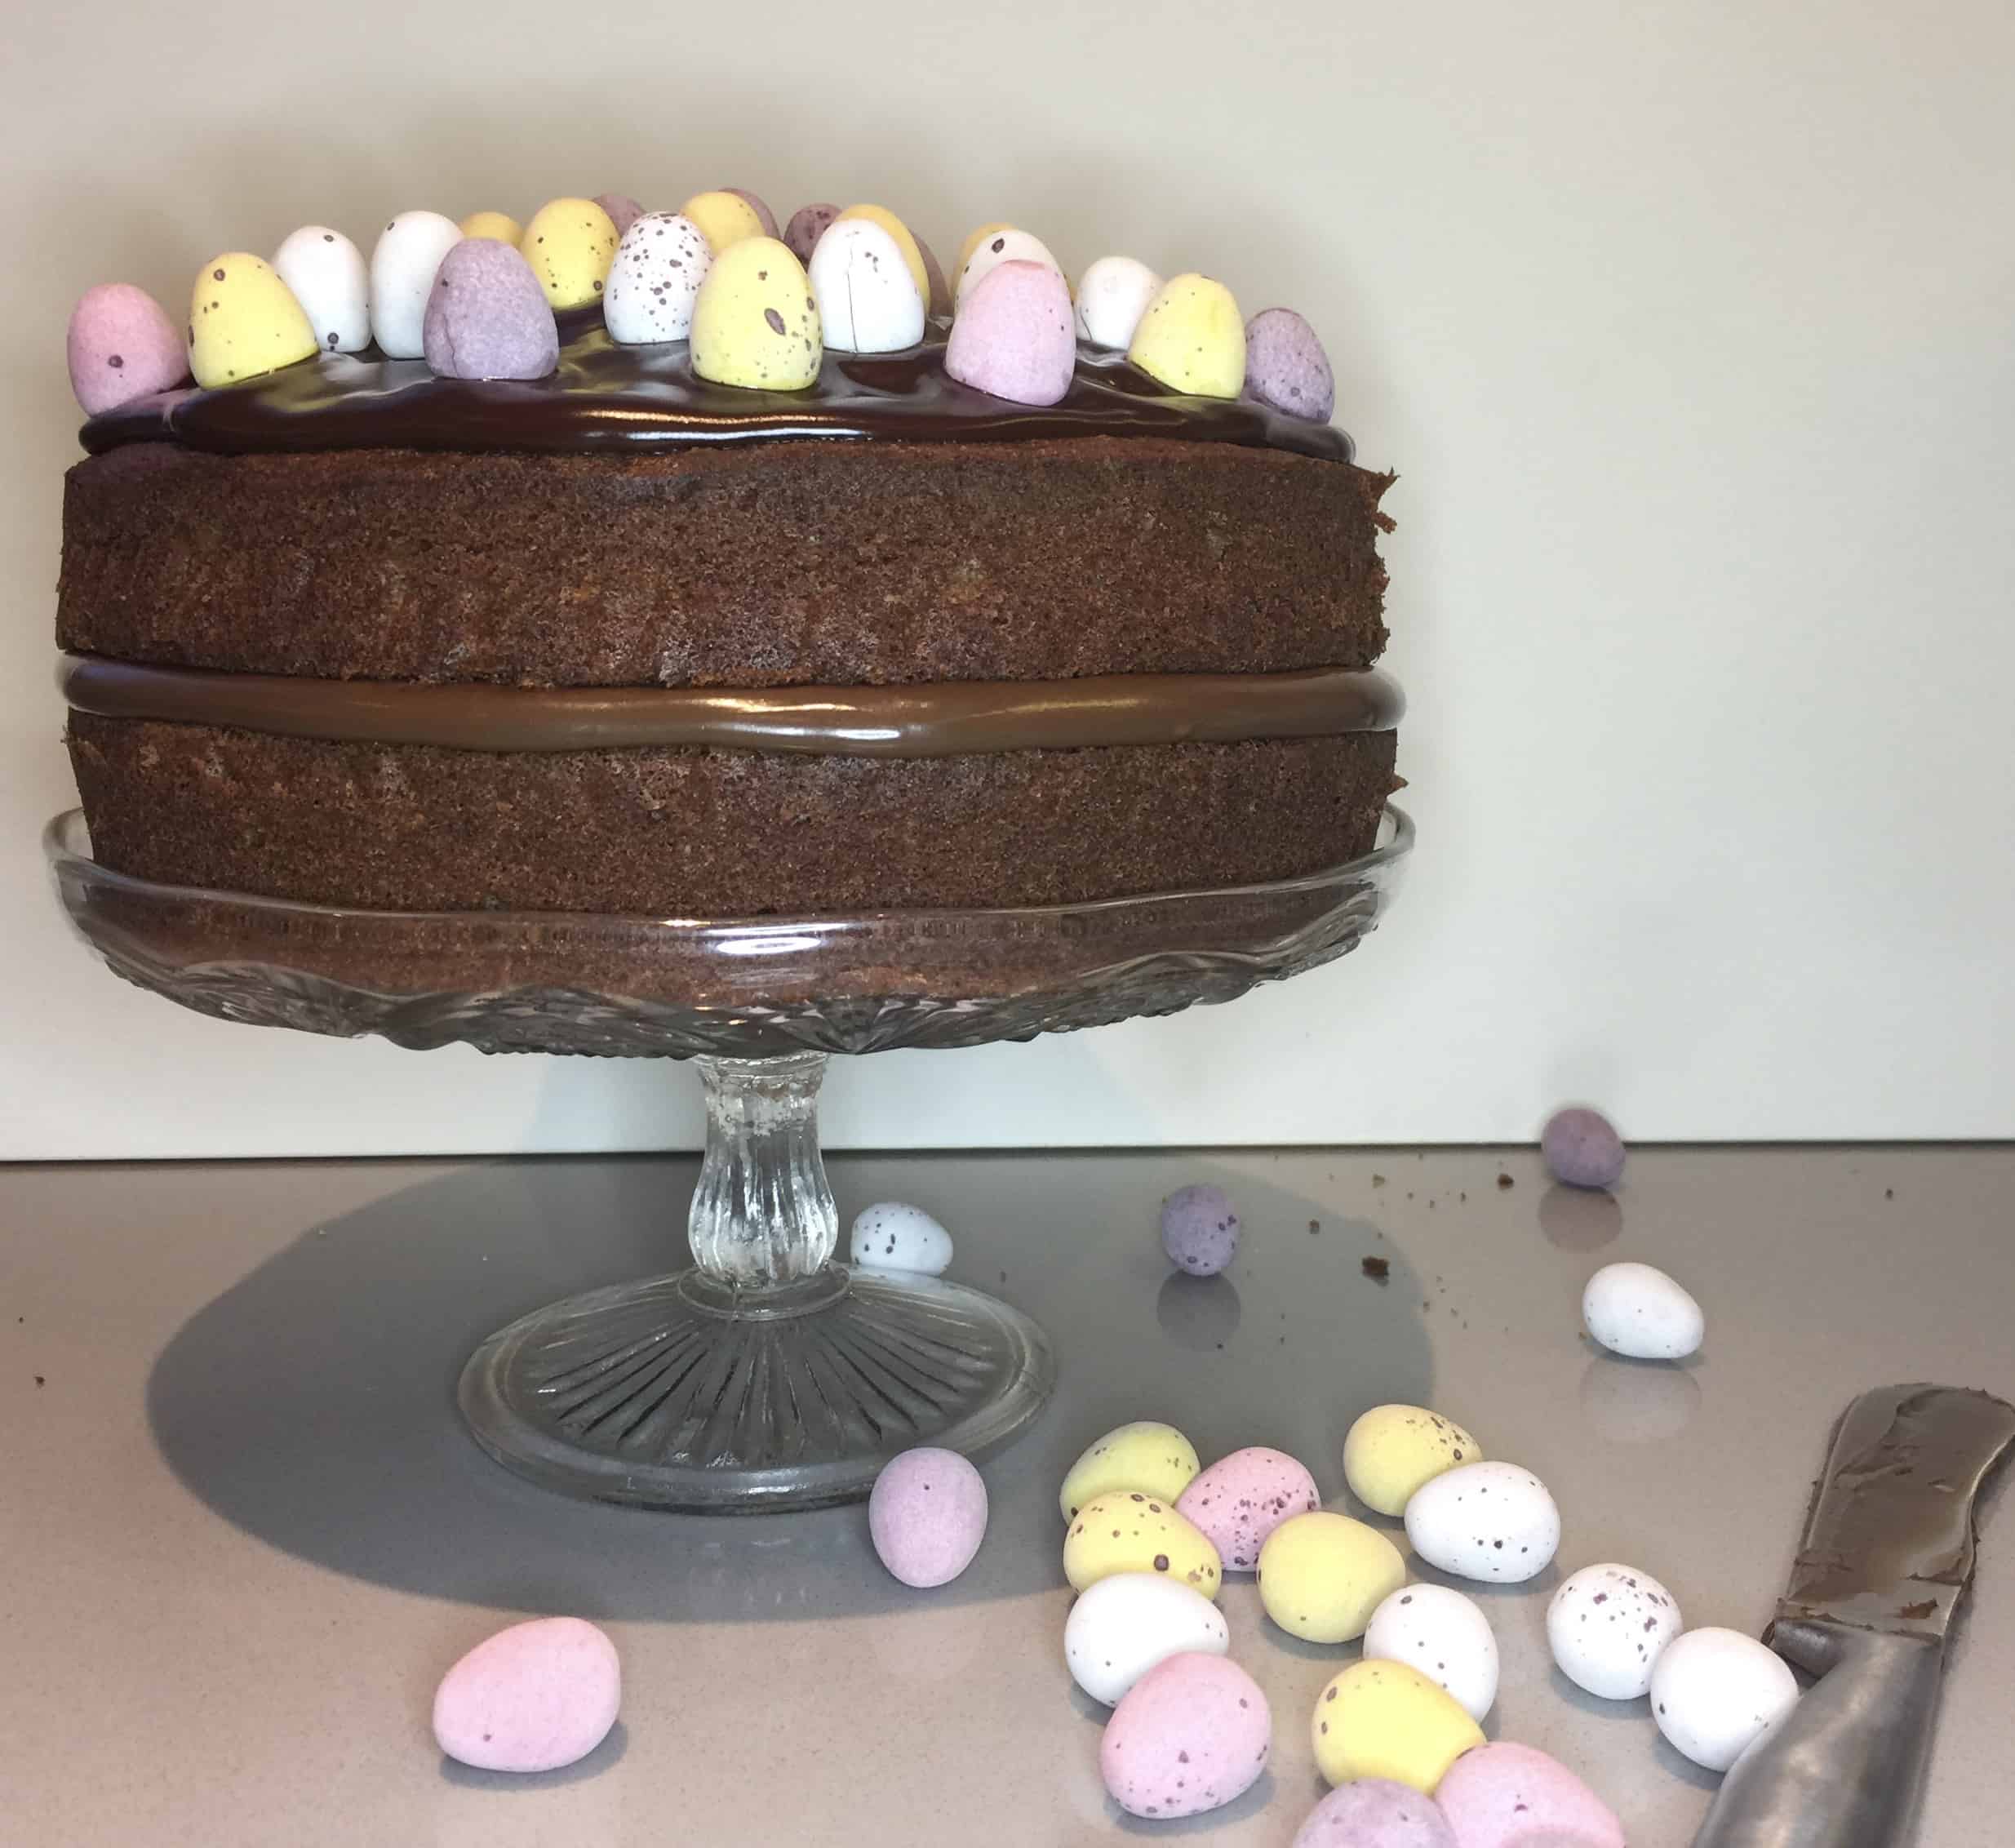 Chocolate Cake with Lindt Hazelnut chocolate spread filling. Decorated with mini sugar coated eggs.